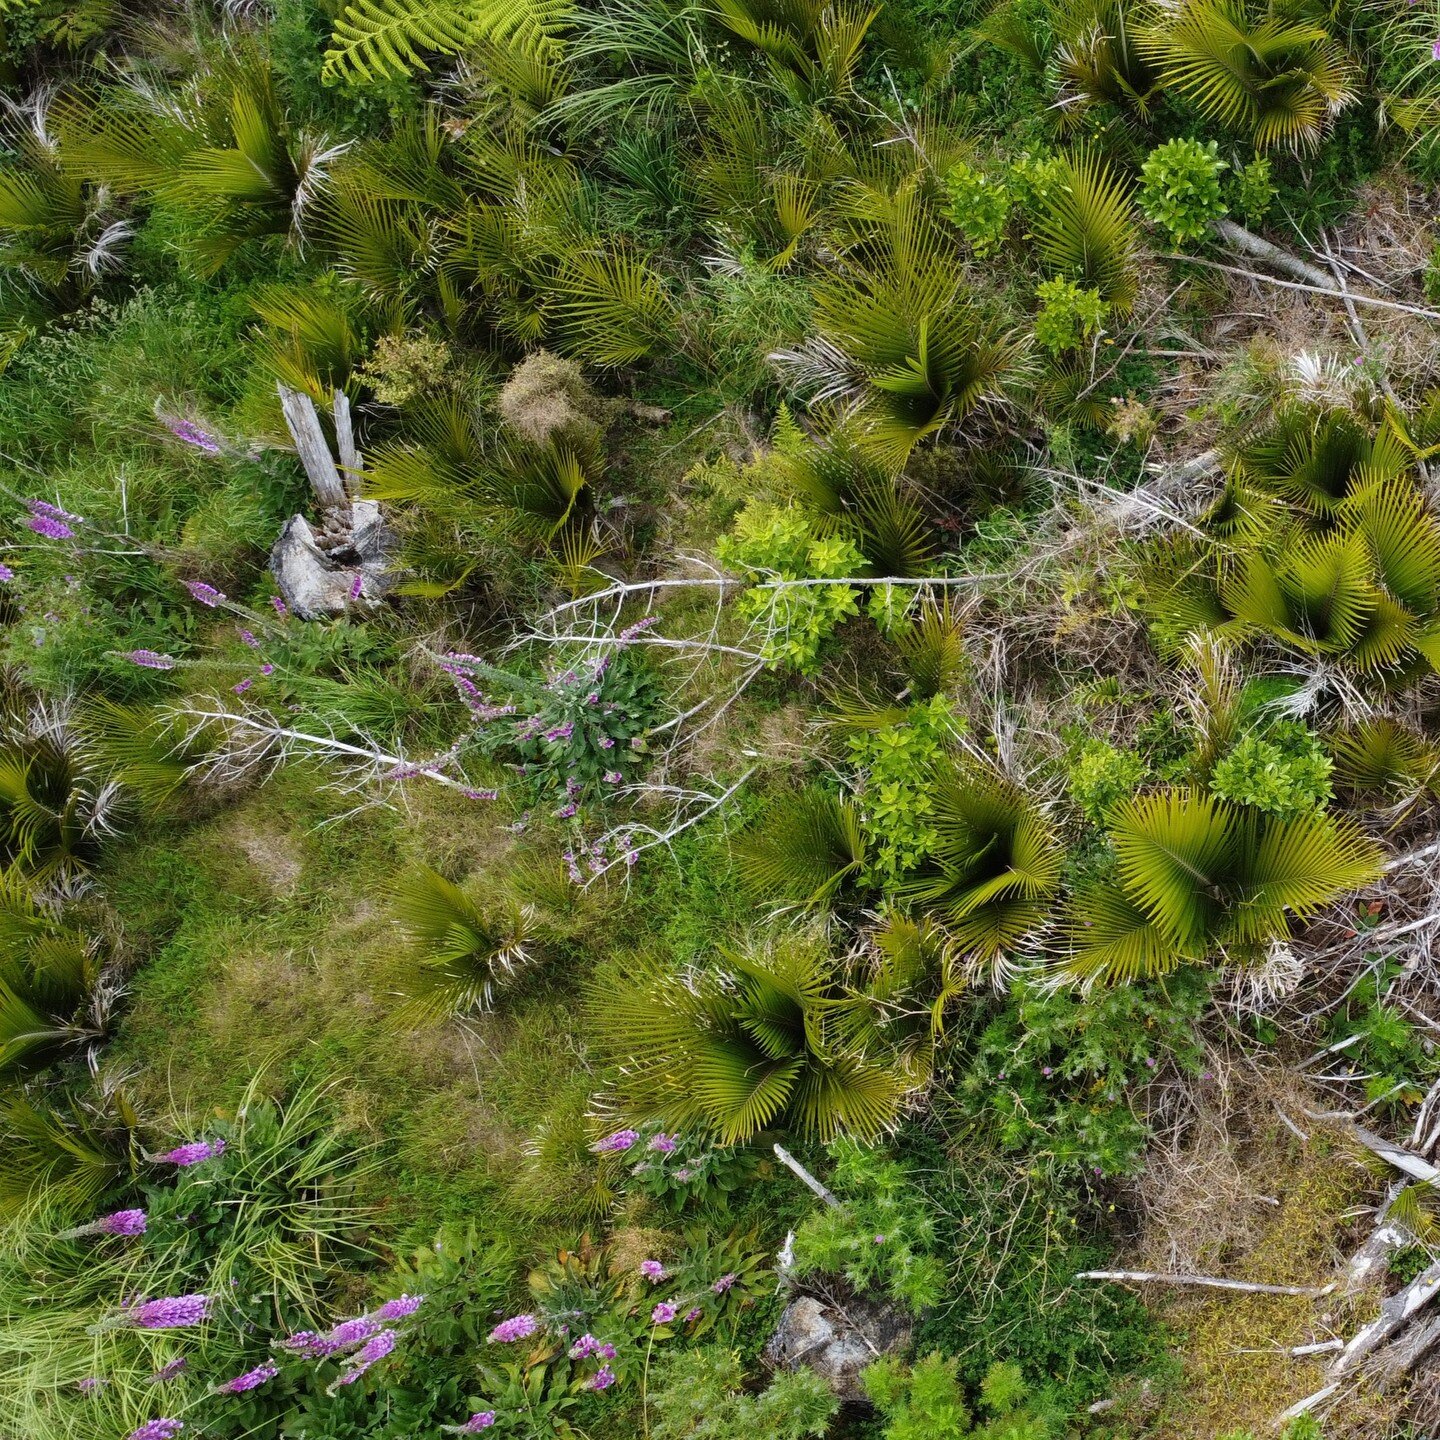 Native (and exotic) forest regeneration on ex-pine block, year 3. 

Species are typical of those found on exposed acid soils following a clearfell harvest of a 20+ year Pinus radiata rotation.
 
In this @studio__north drone shot we see:
-
Nikau
Kāram